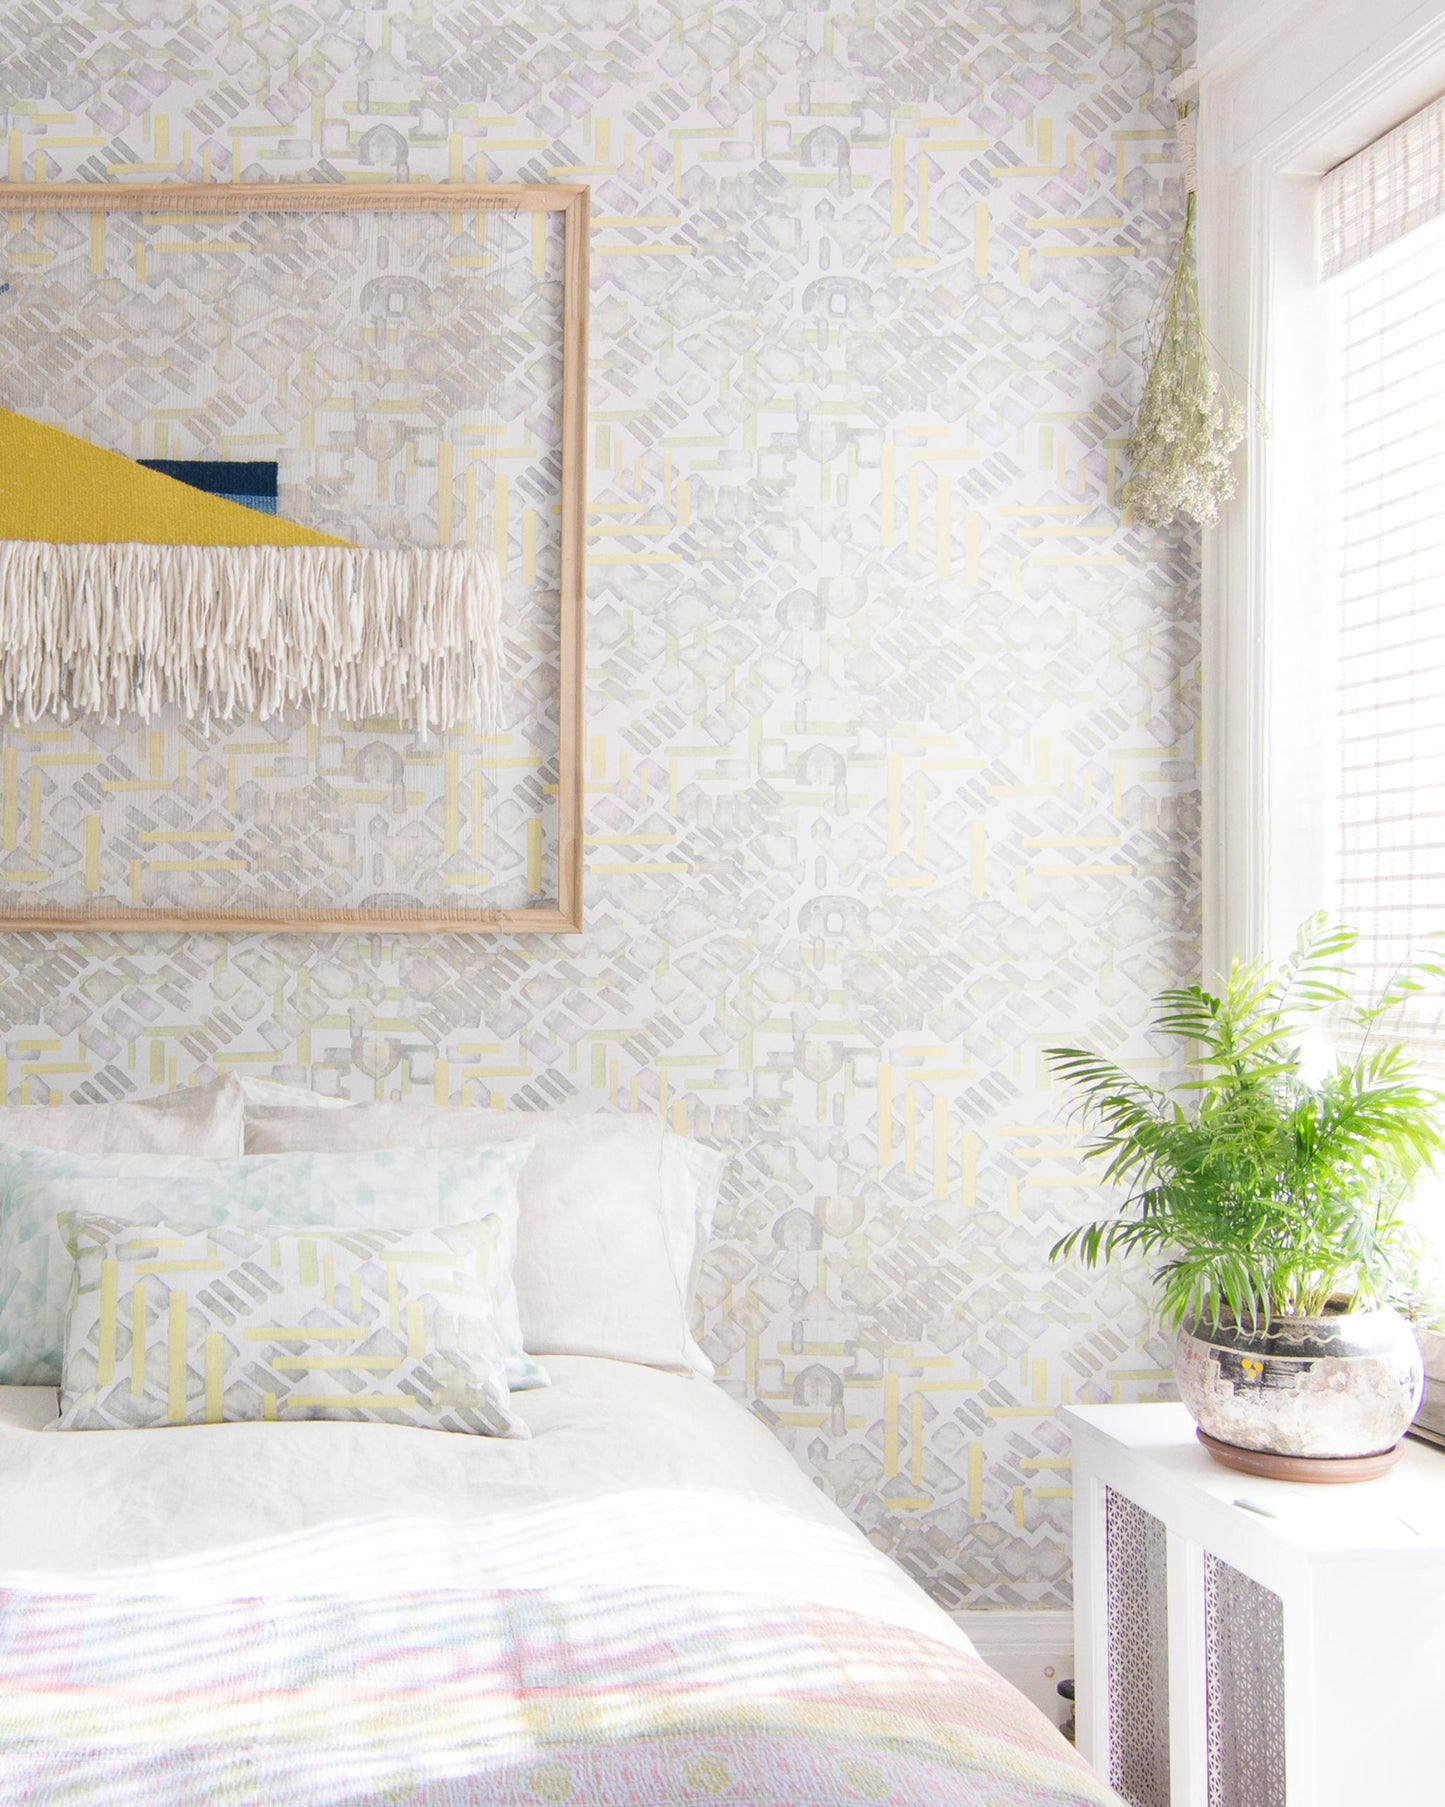 A bed in a room with Stele Wallpaper Citrus patterned fabric